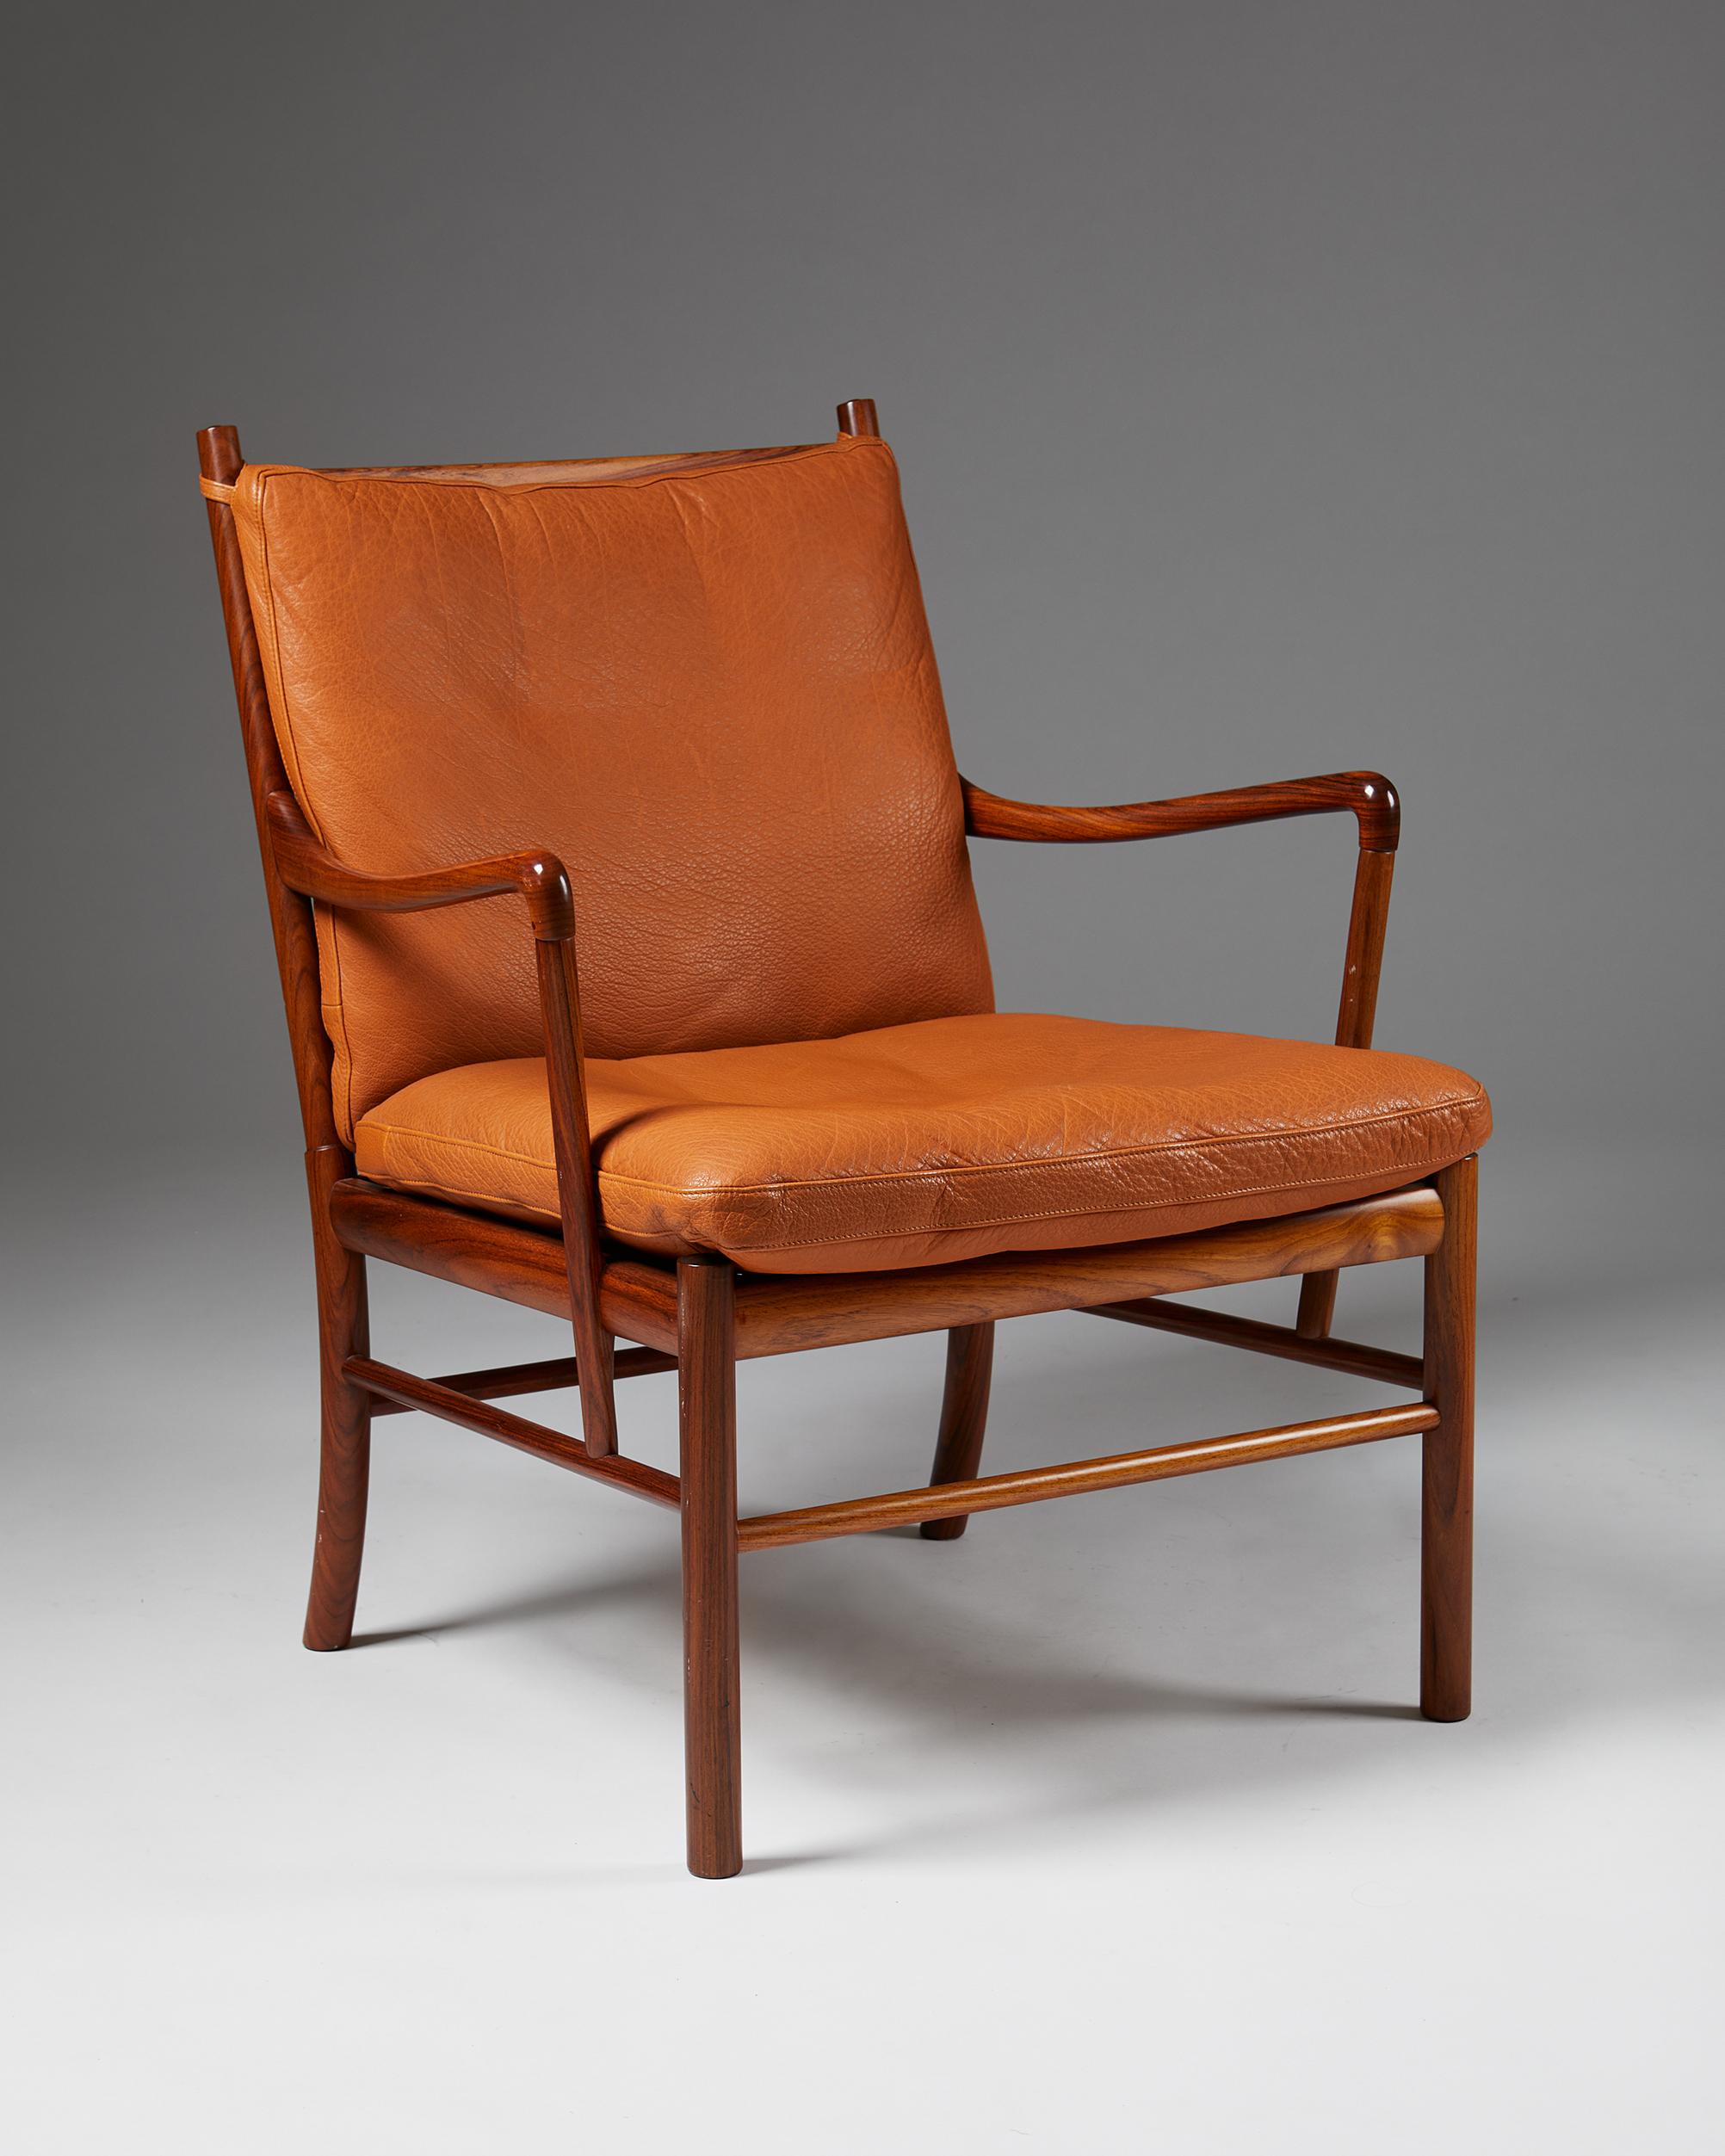 Mid-Century Modern Colonial Chair Designed by Ole Wanscher, Manufactured by P Jeppesen